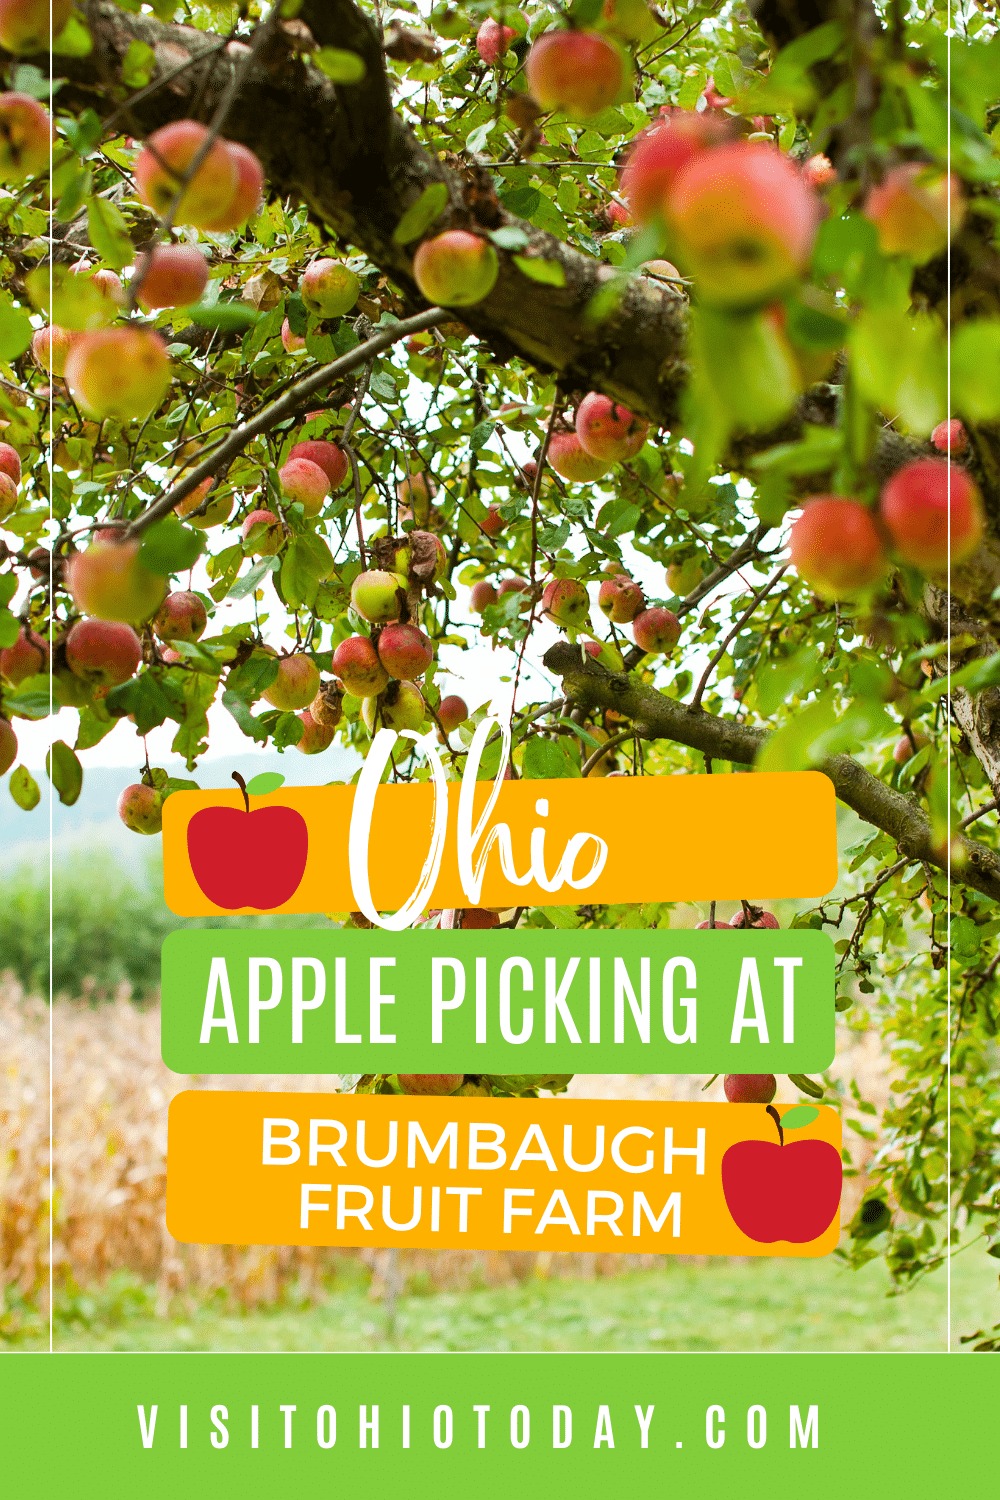 Picture of an apple tree with red apples, text: ohio apple picking at brumbuagh fruit farm